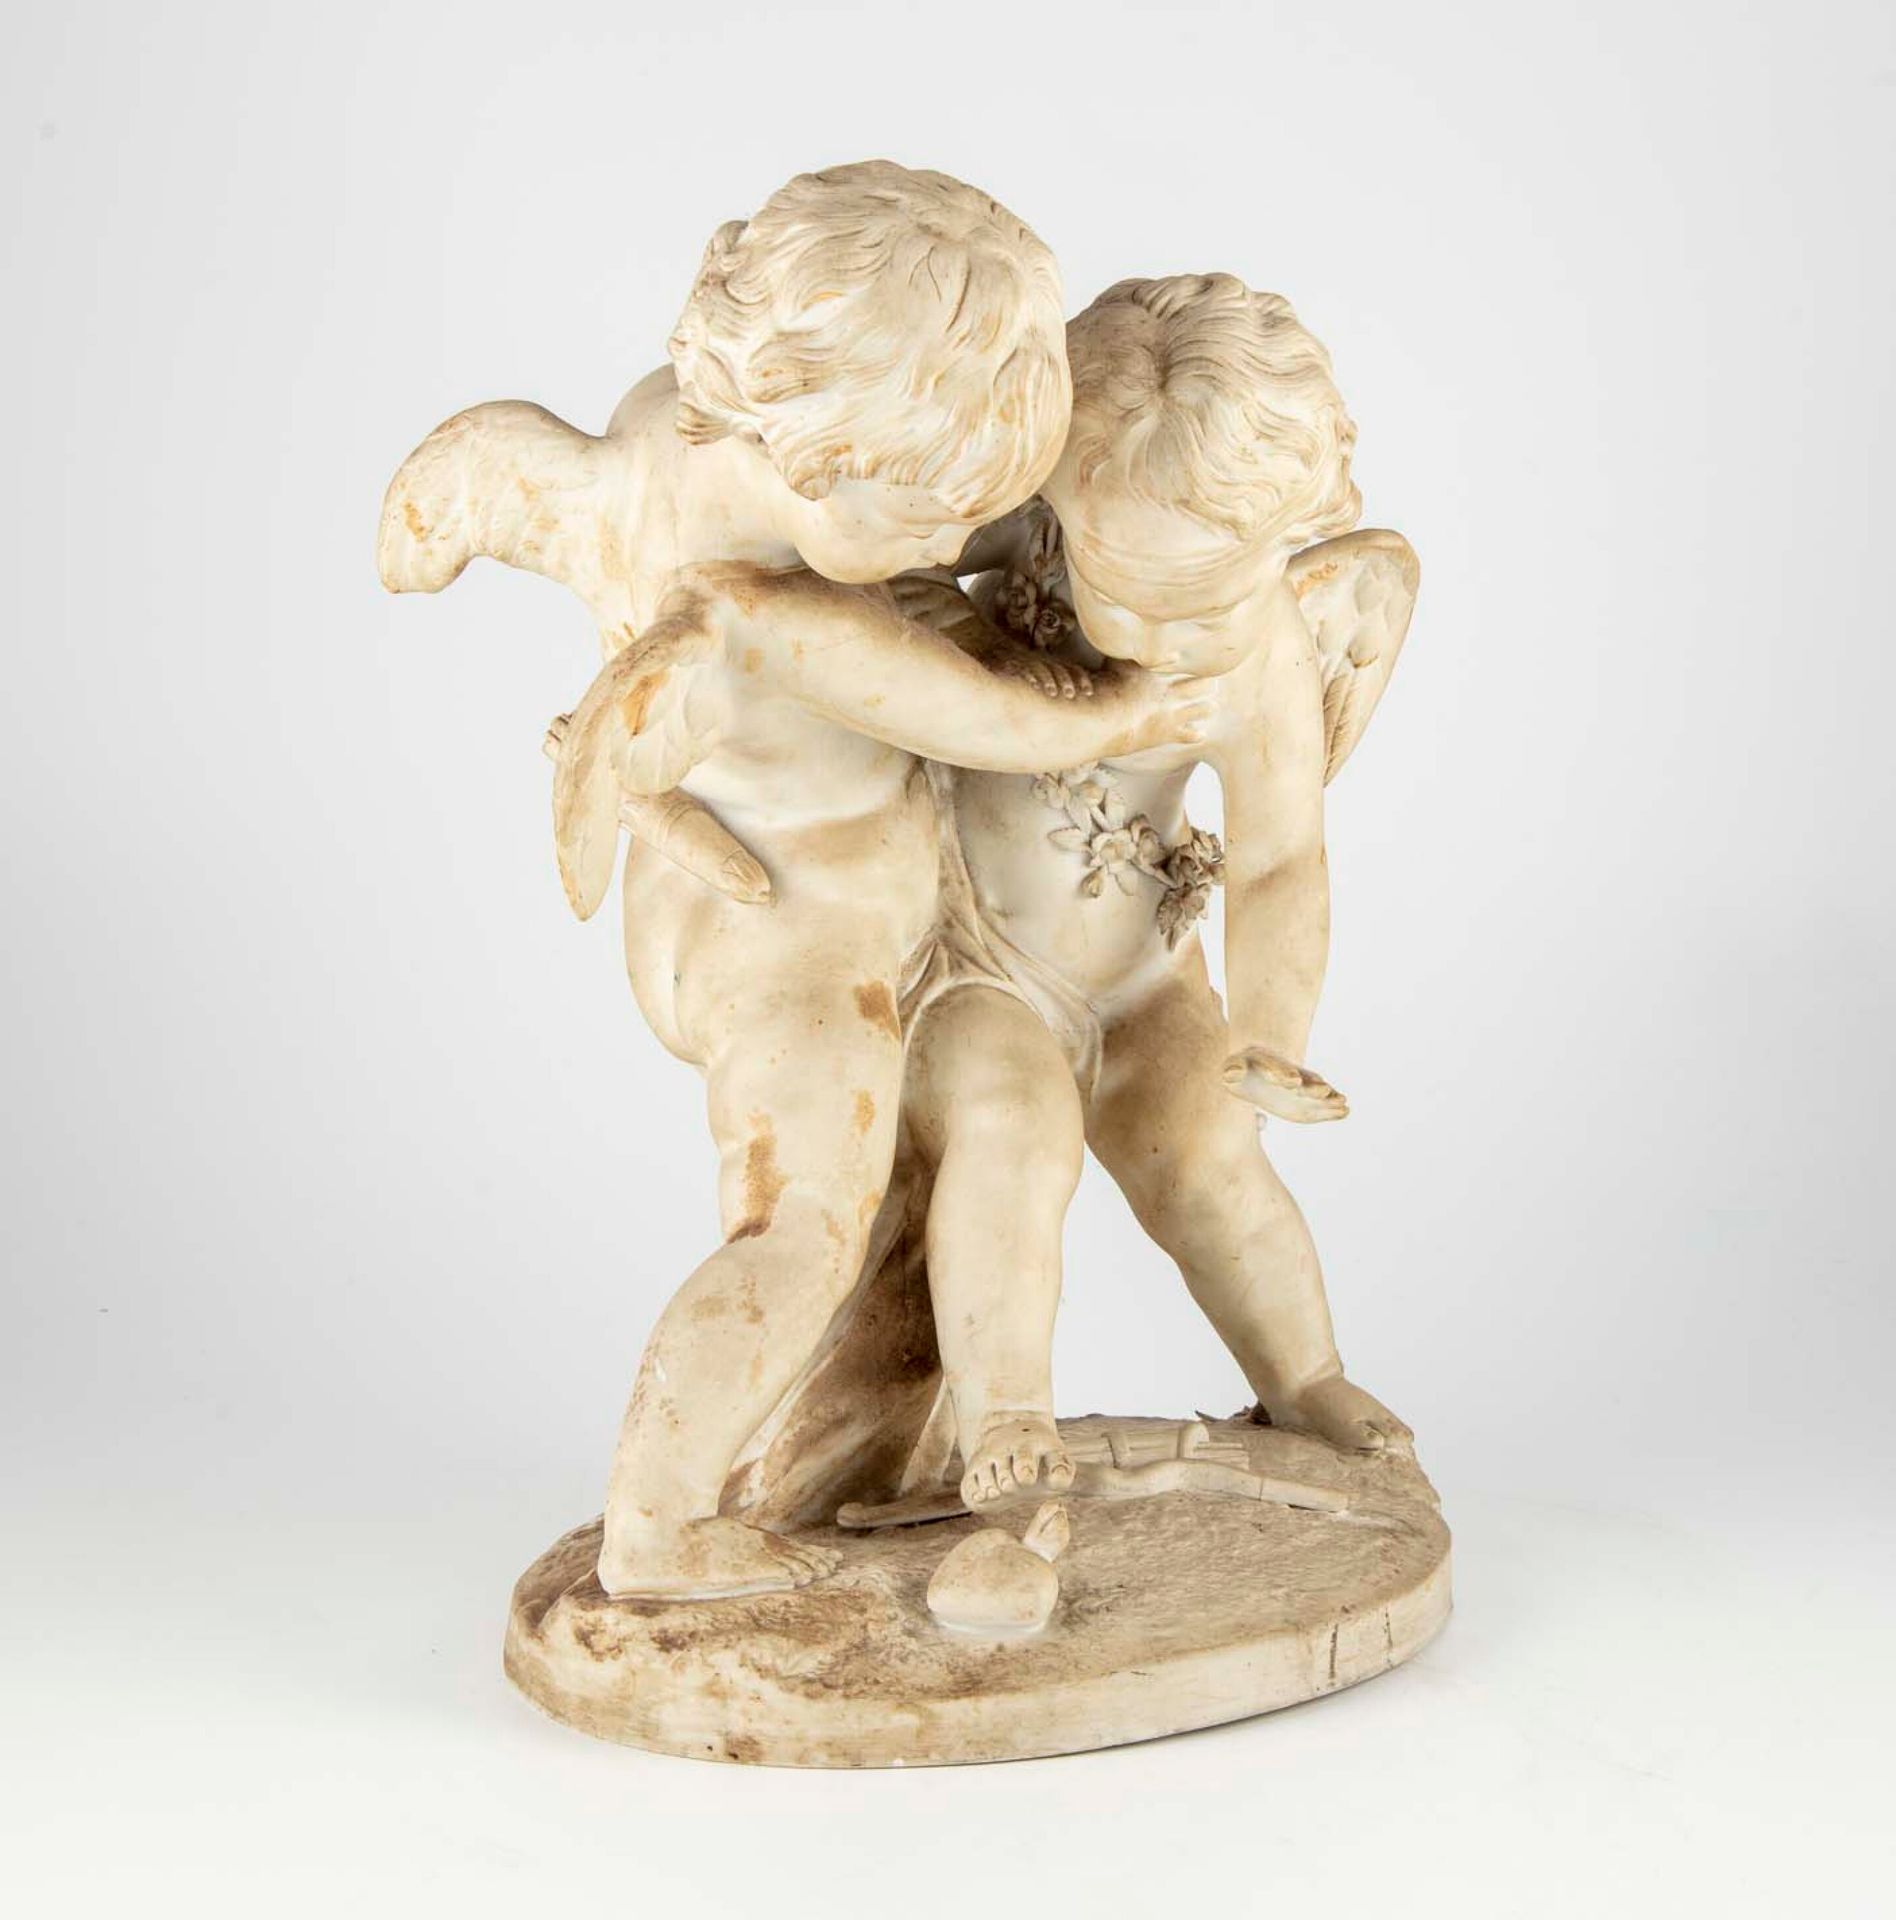 ECOLE FRANCAISE FRENCH SCHOOL, 19th century

The two lovers fighting

Biscuit gr&hellip;